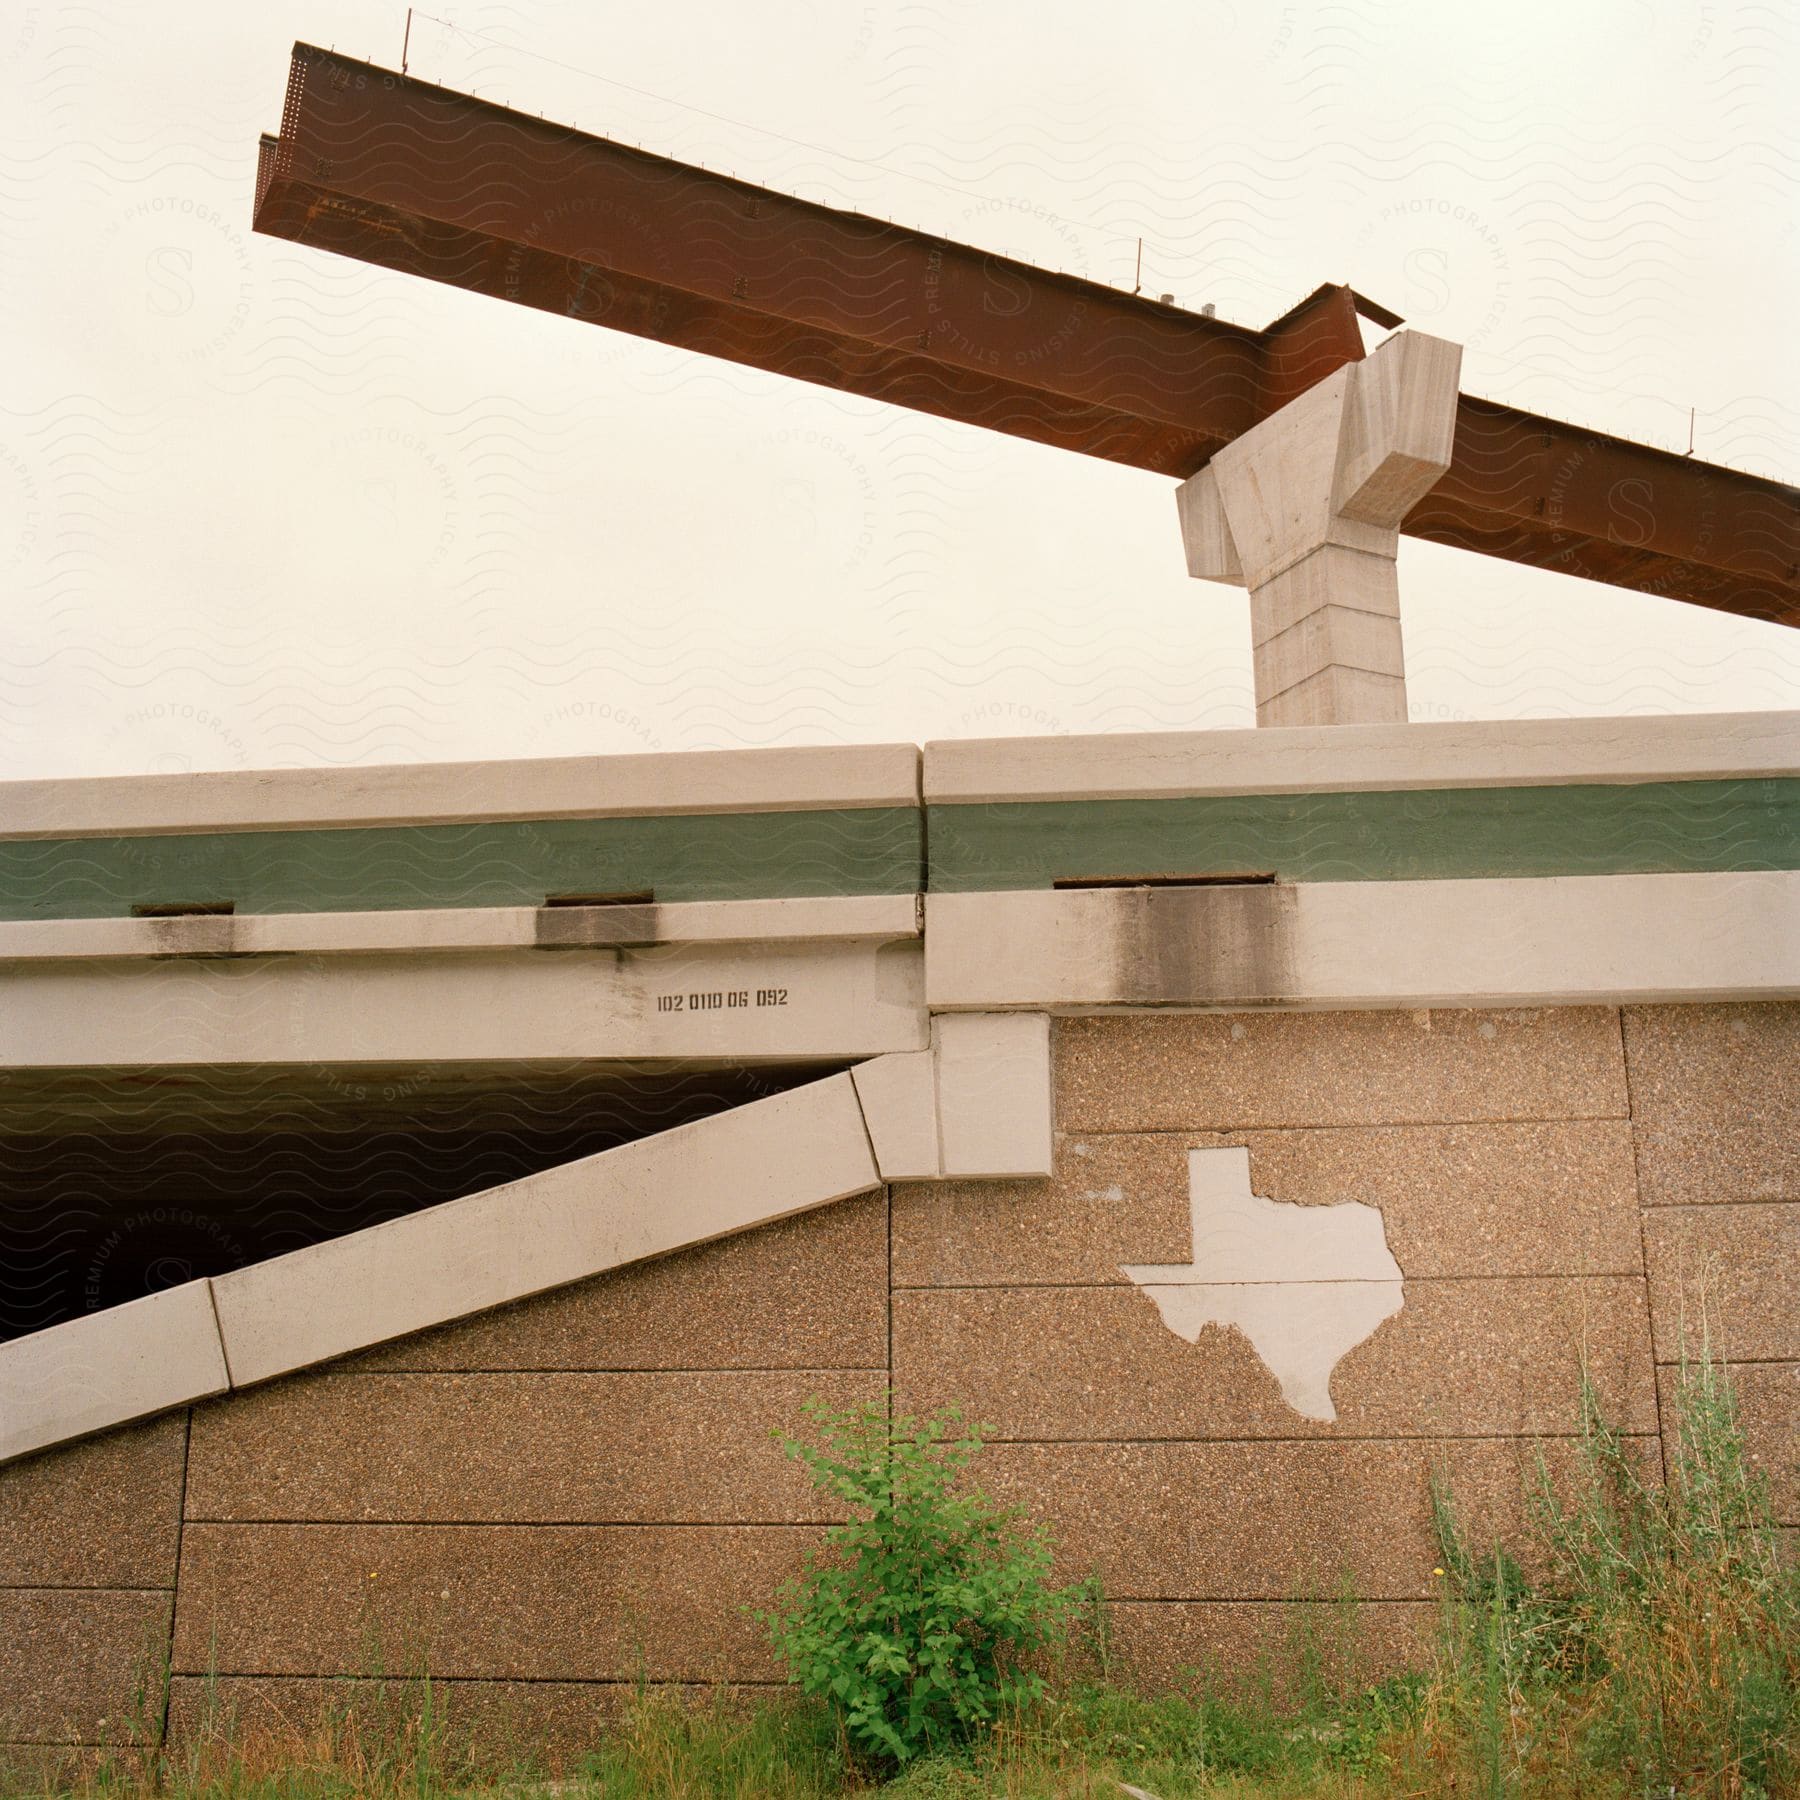 An unfinished metal beam atop a highway pillar in texas part of a new overpass over an existing highway bridge